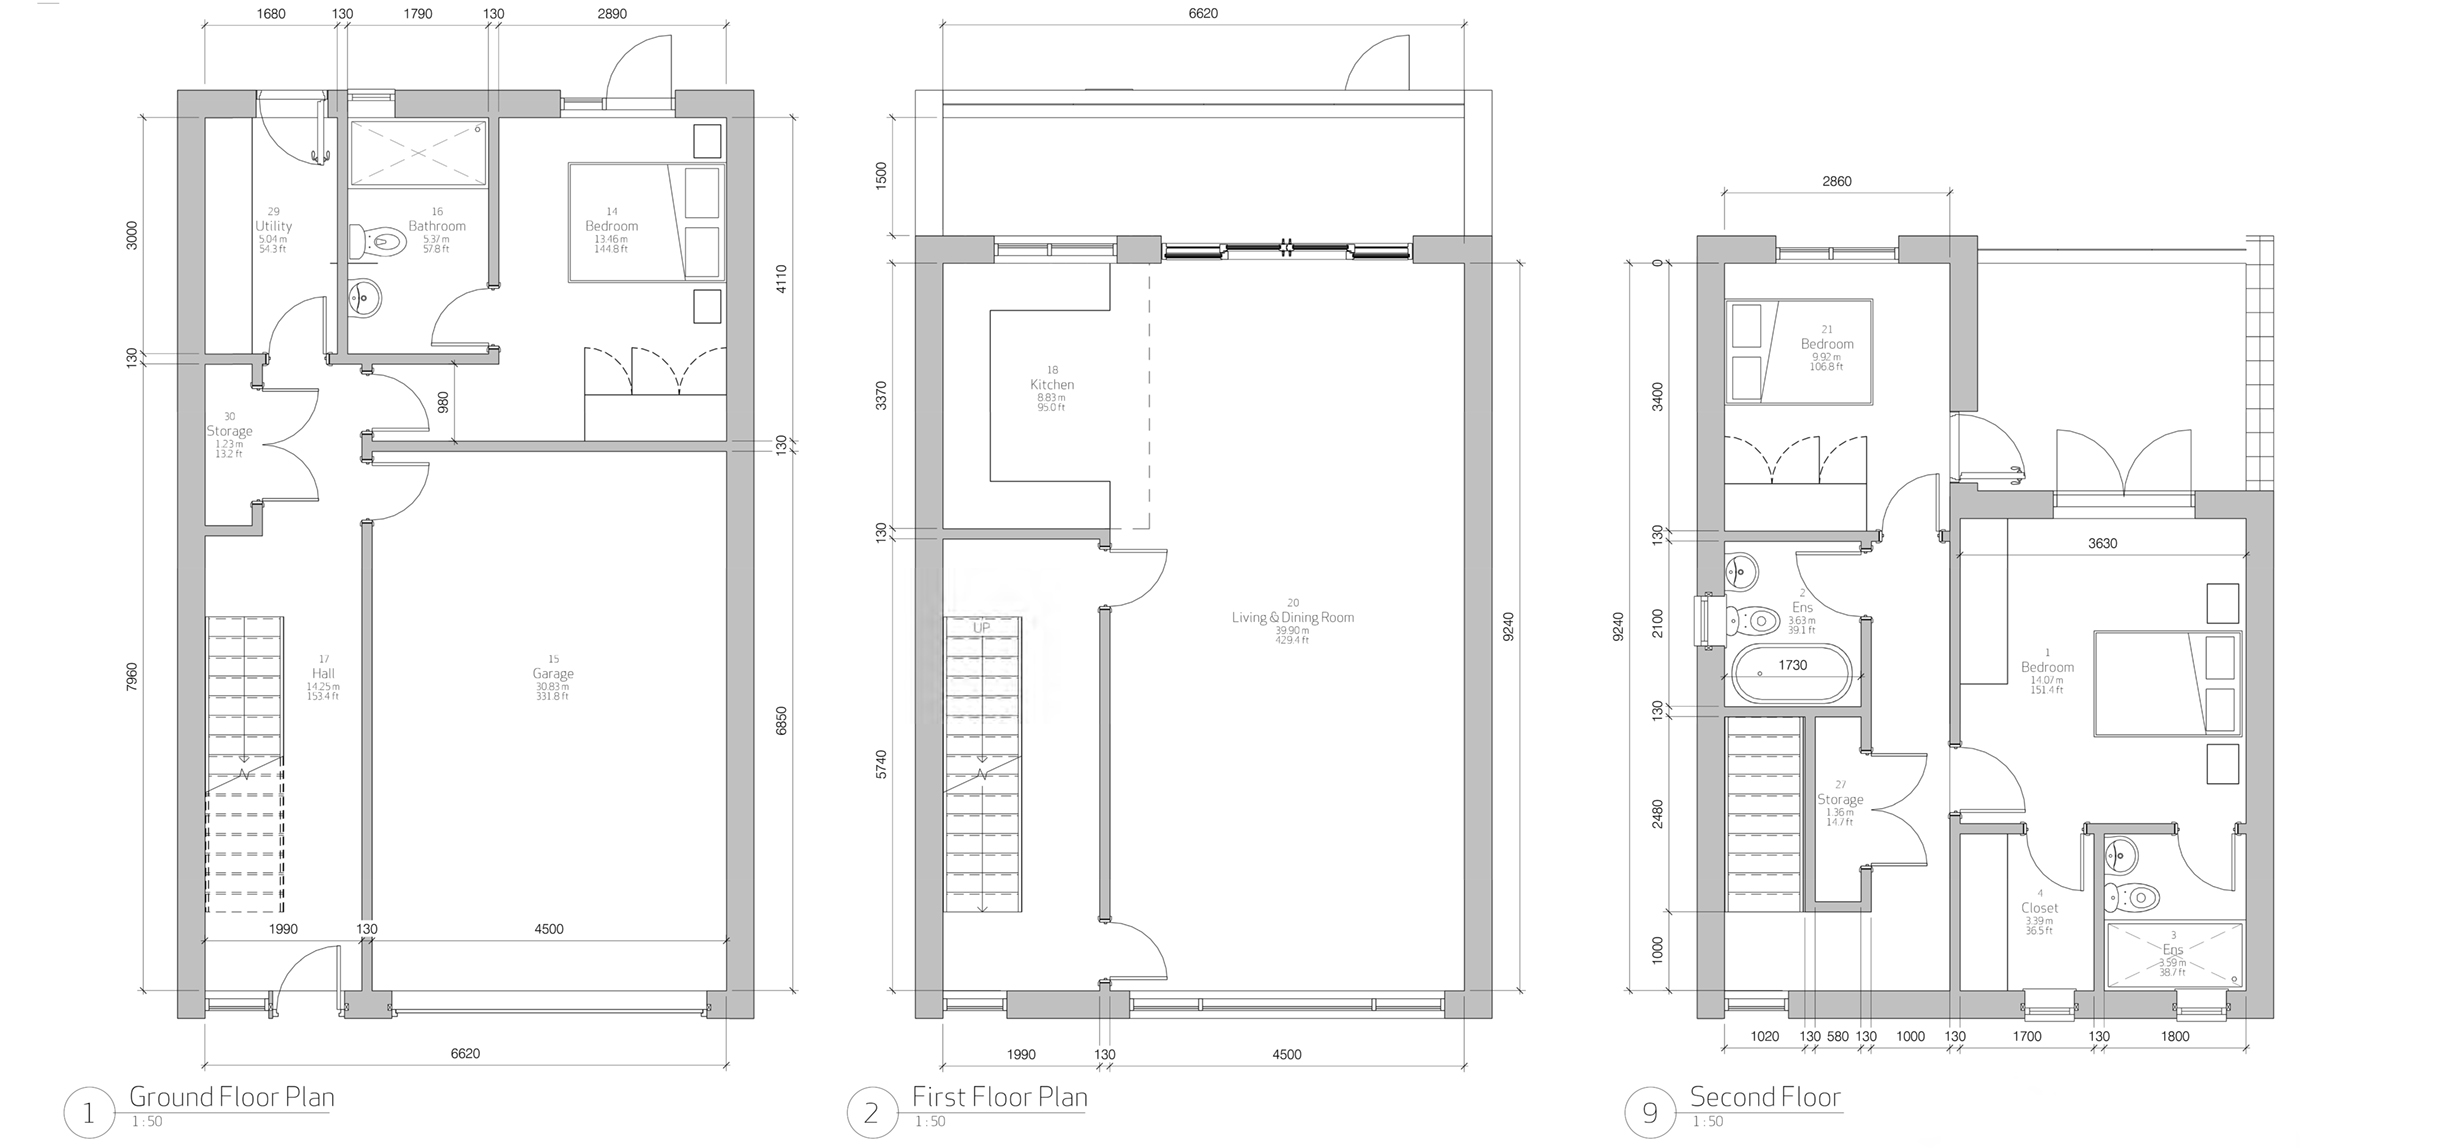 New housing, Godreaman, Wales - House plans